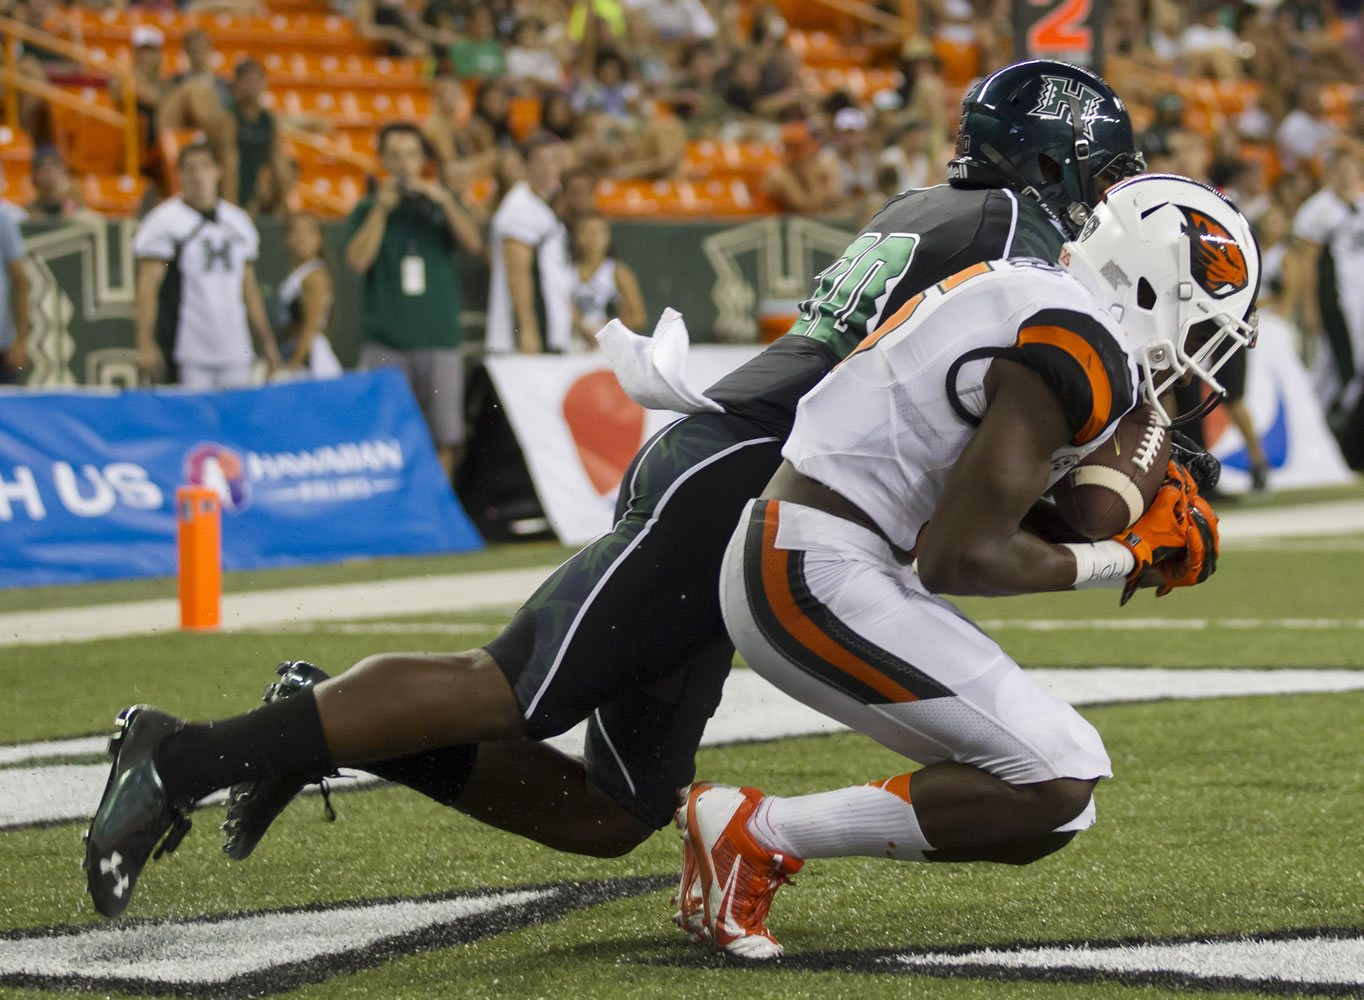 Oregon State wide receiver Victor Bolden (6) catches a pass for a touchdown while being defended by Hawaii defensive back Nick Nelson (20) in the third quarter of an NCAA college football game, Saturday, Sept. 6, 2014, in Honolulu.